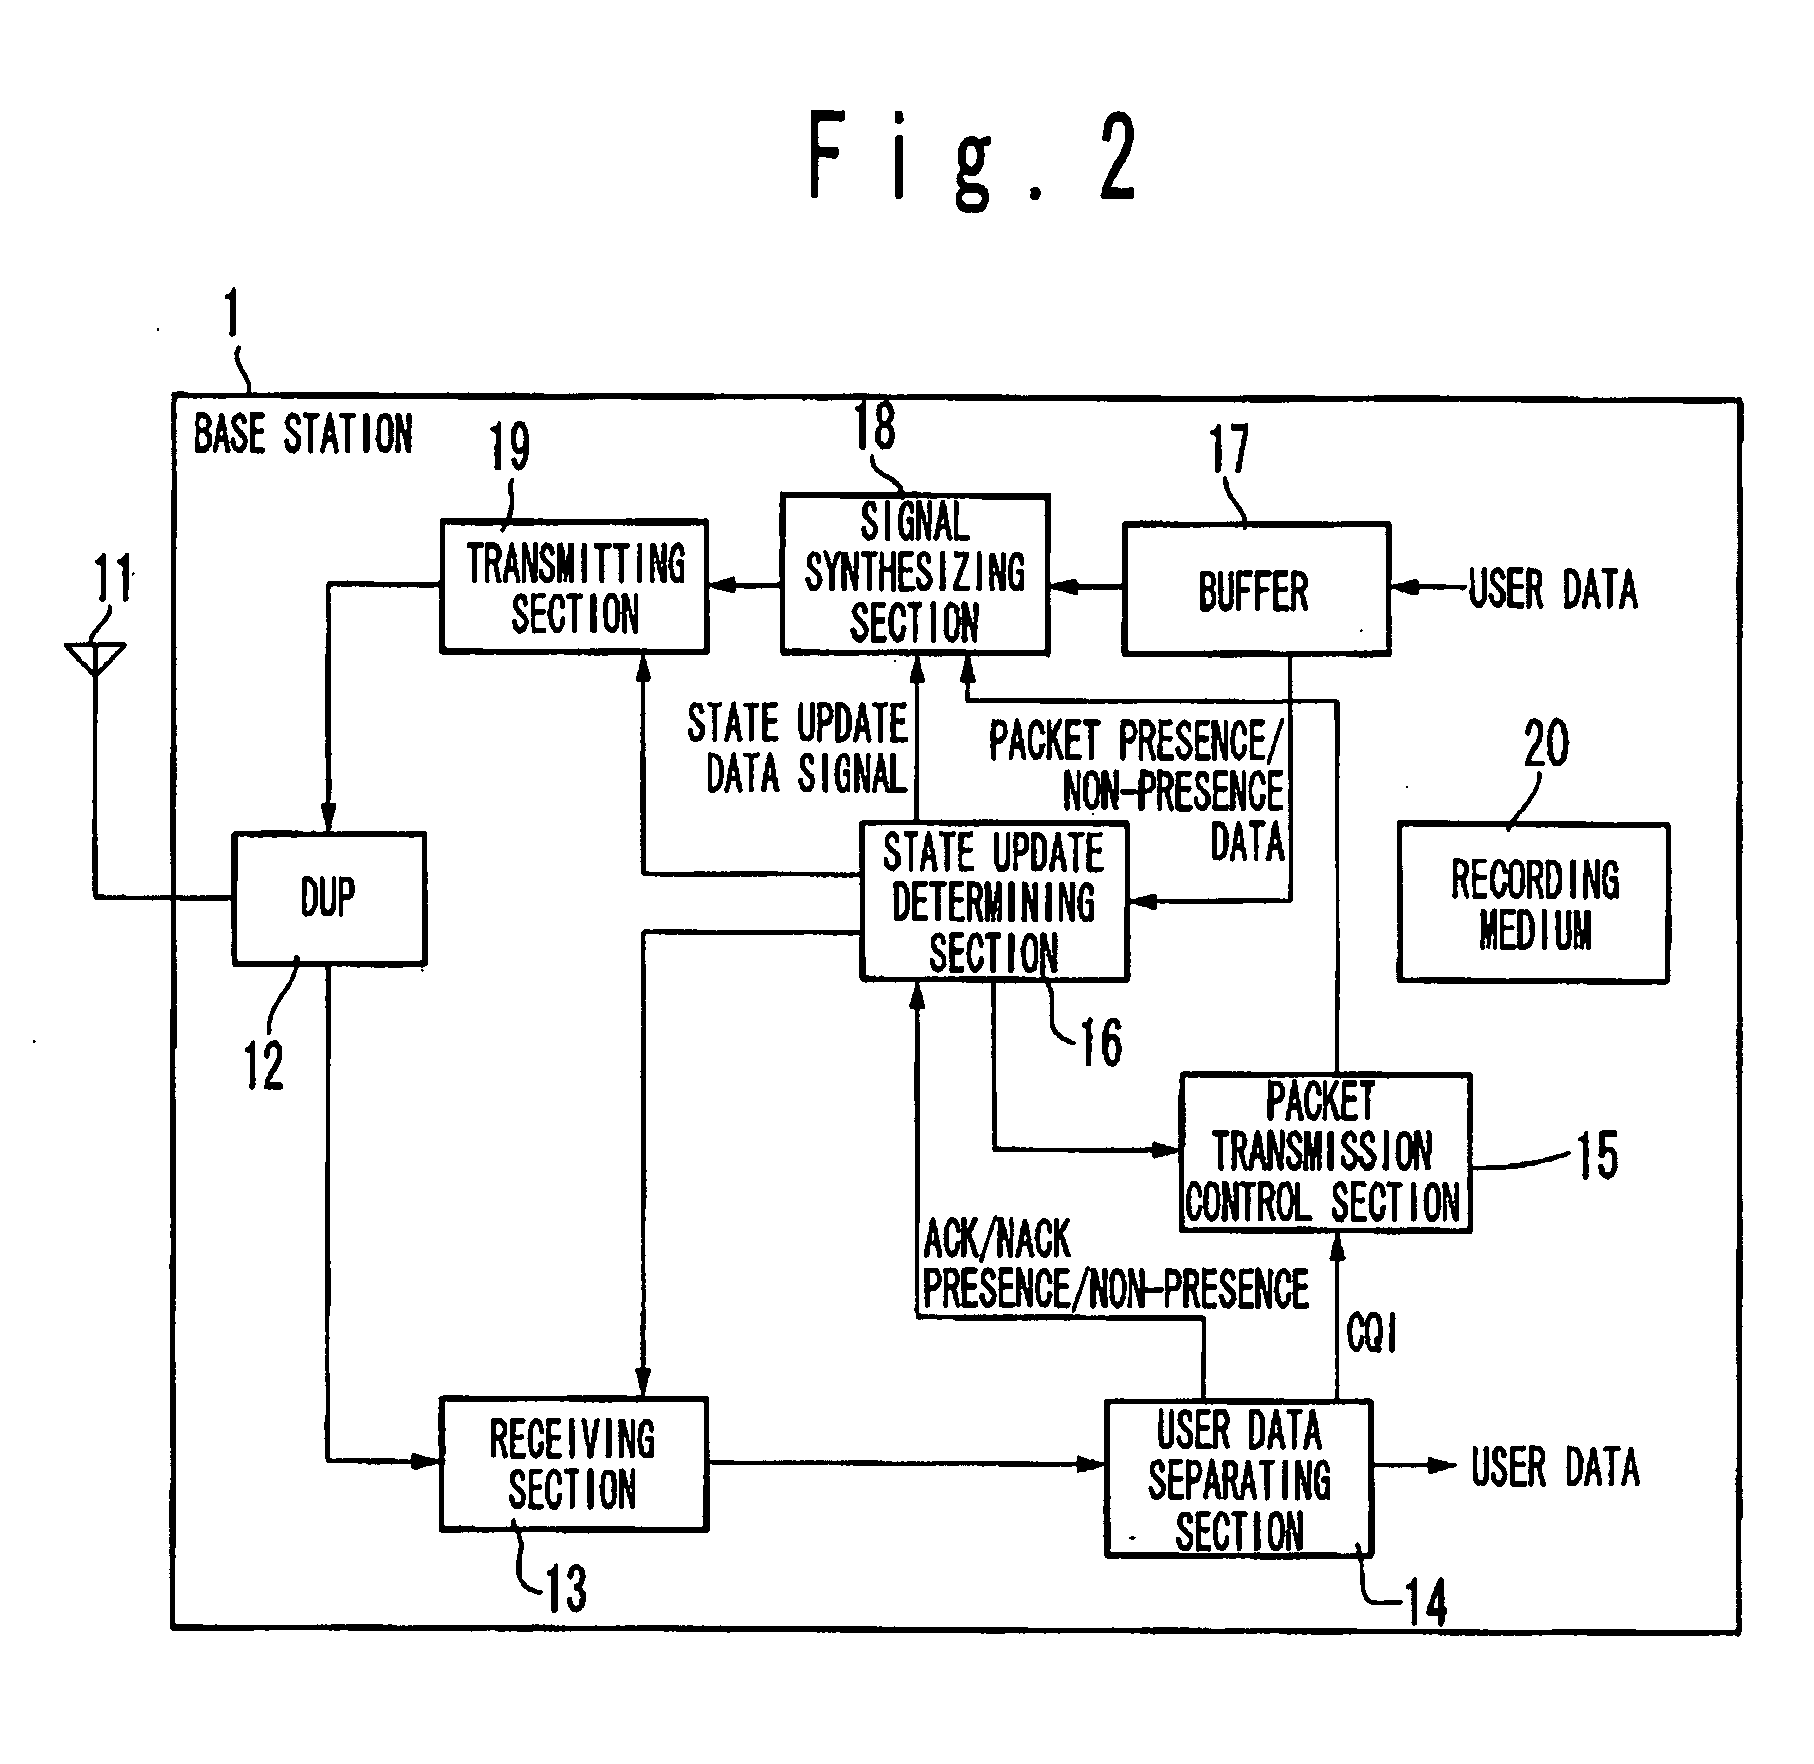 System and method for mobile communication